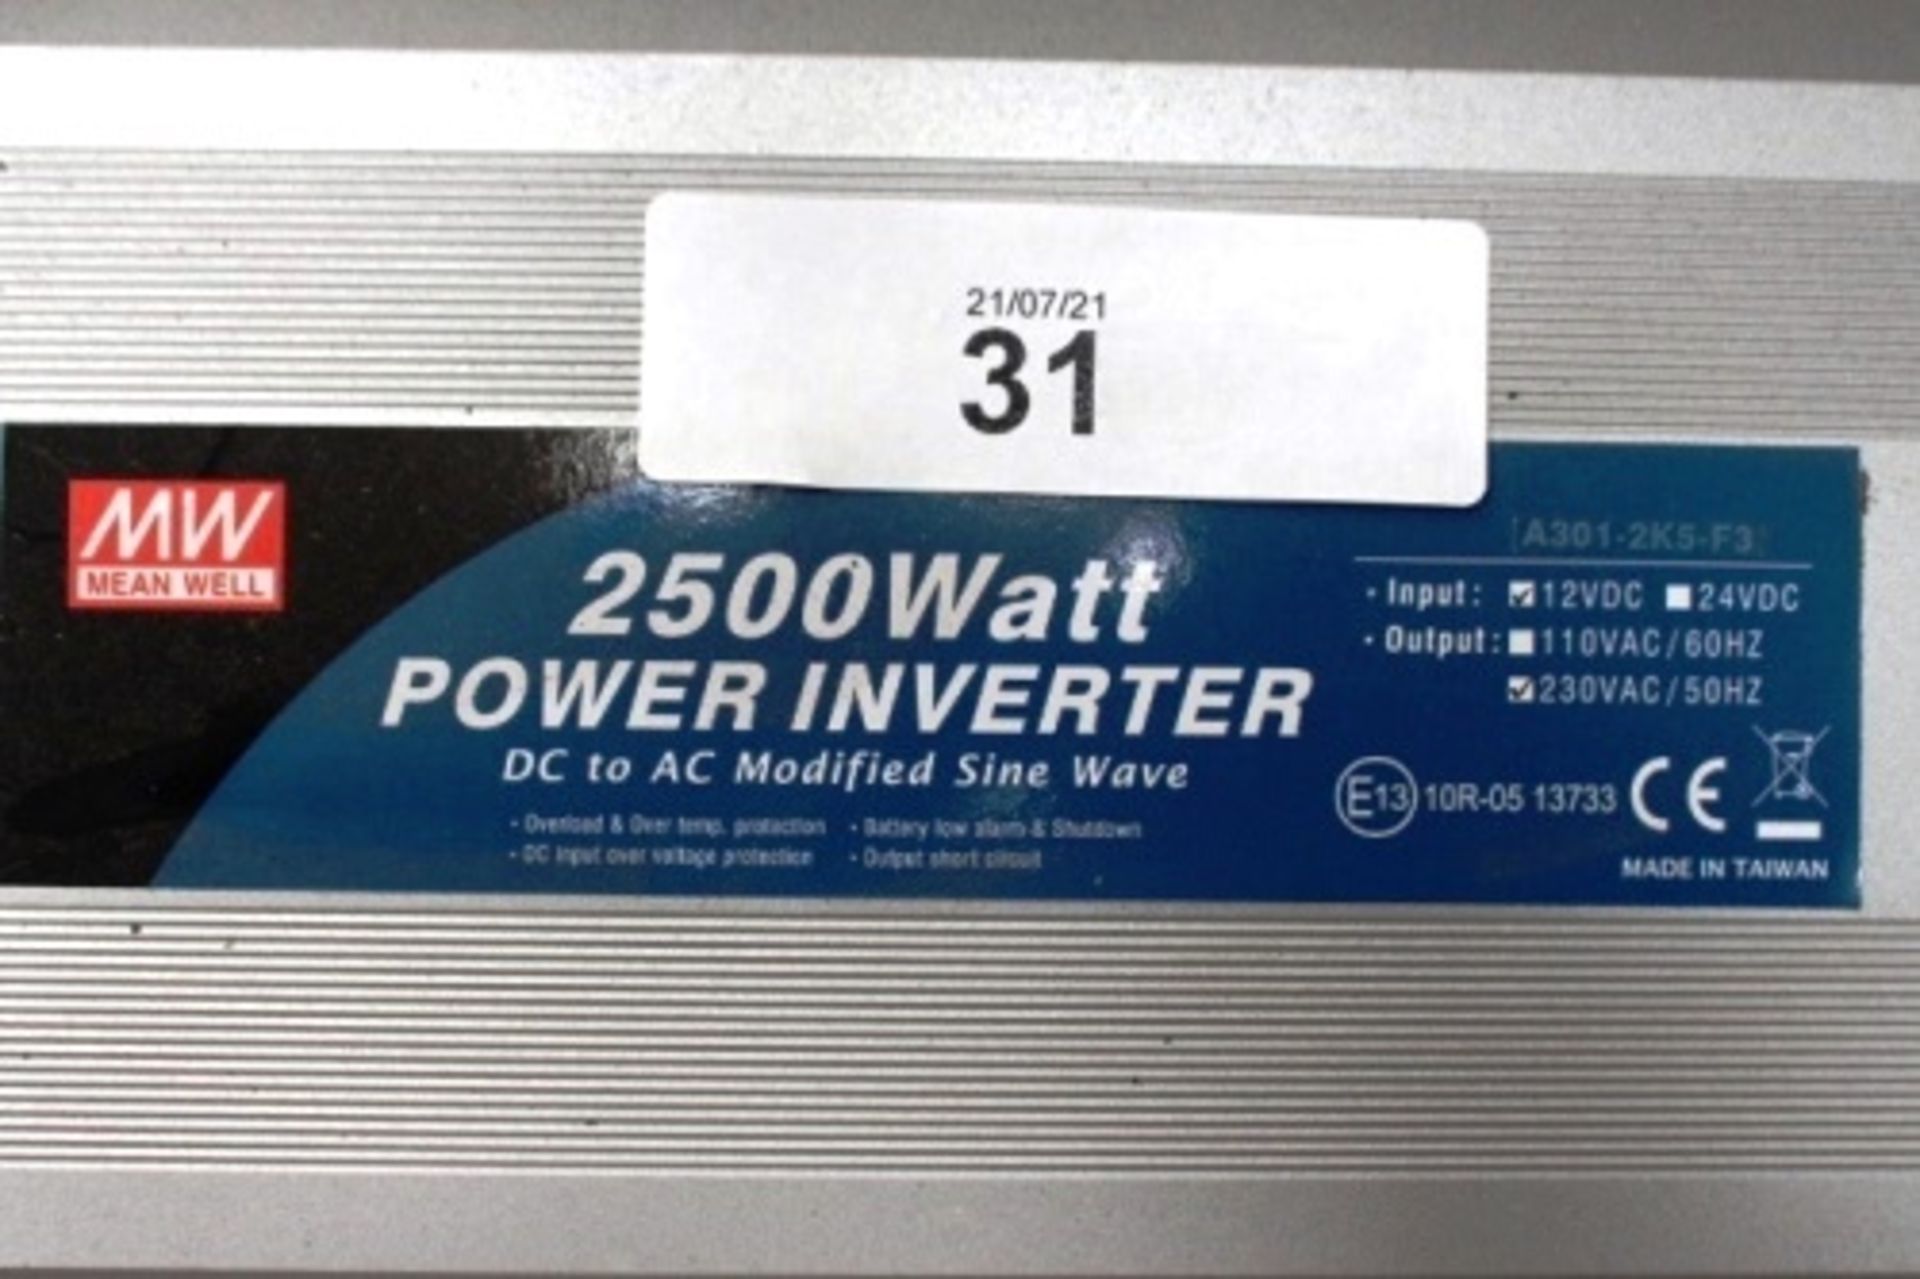 1 x Mean Well 2500W AC/DC power inverter, model A301-2-K5-F3, 230 VAC, 12 VDC - New in box (ES5end)